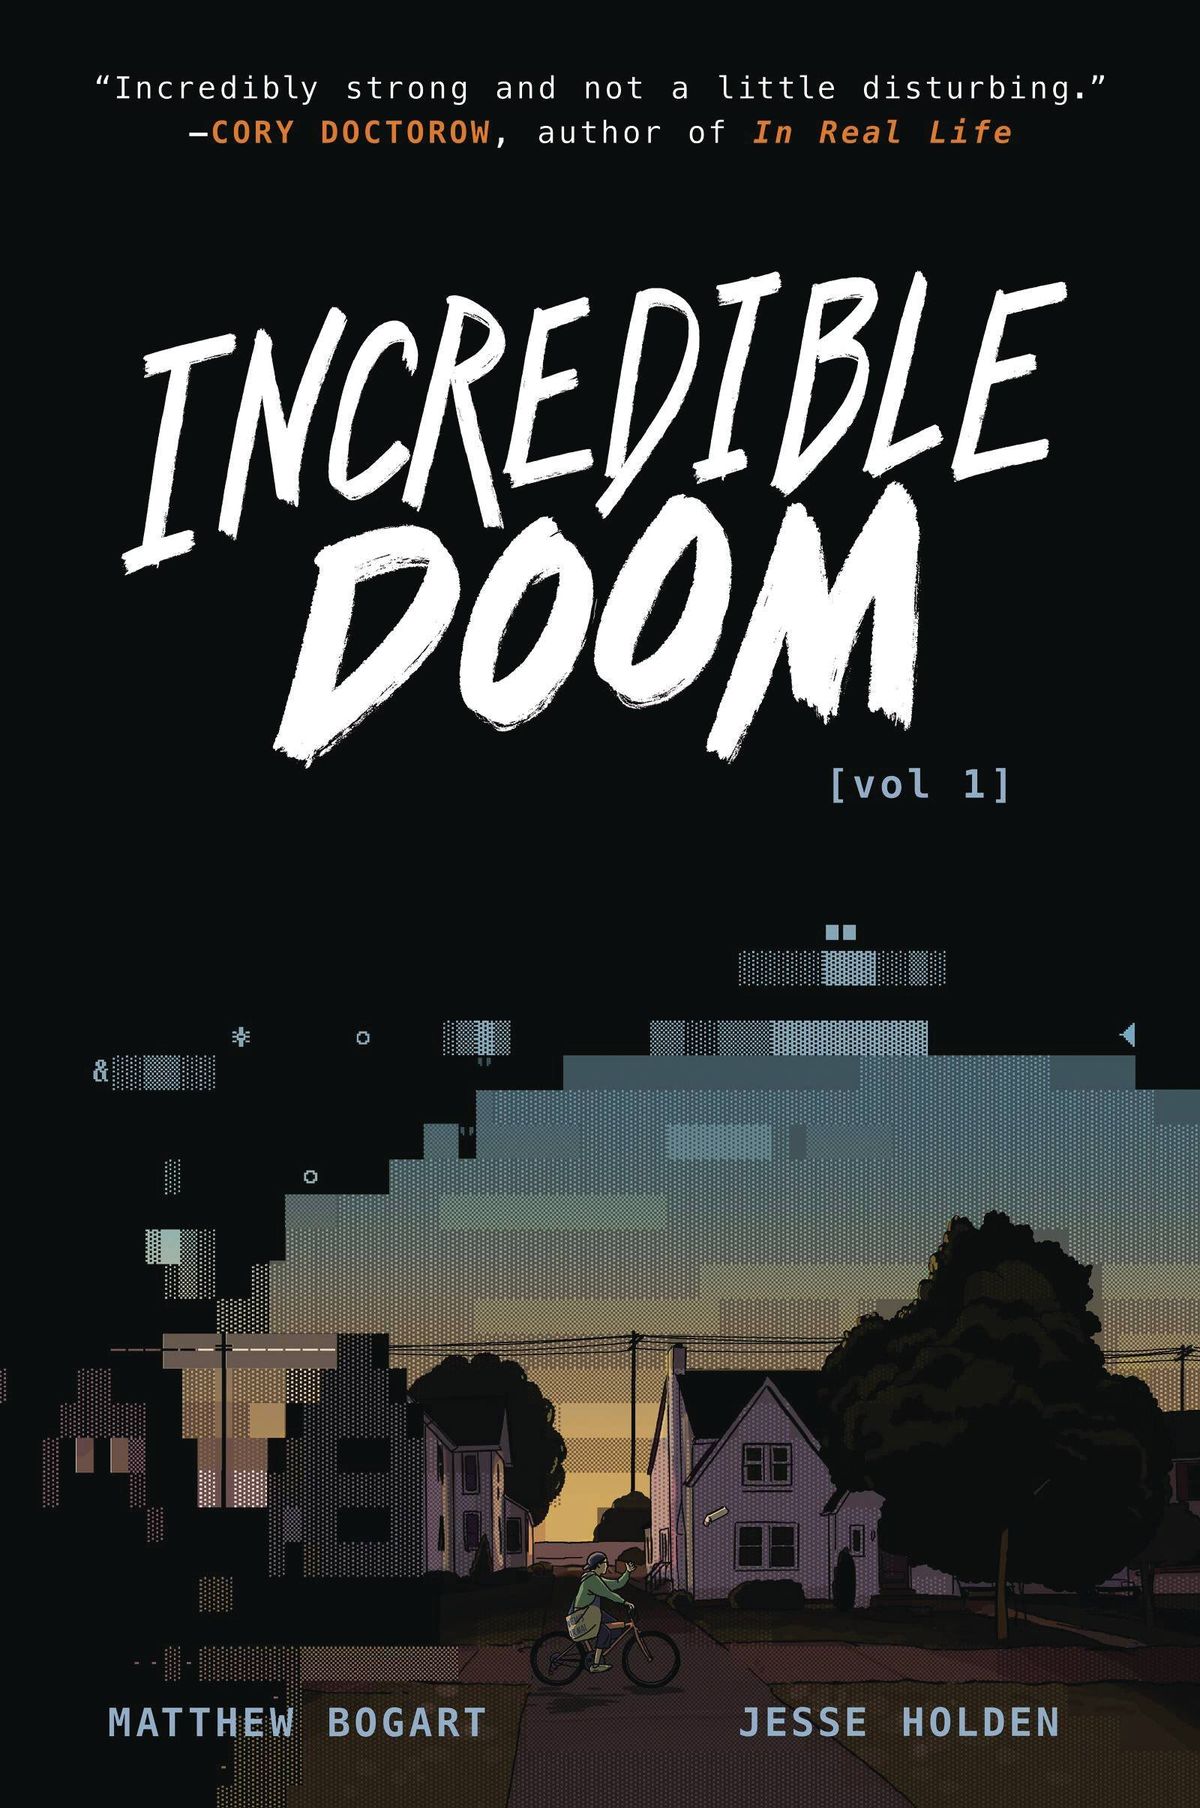 INCREDIBLE DOOM Collection - Cover Reveal and Pre-orders!